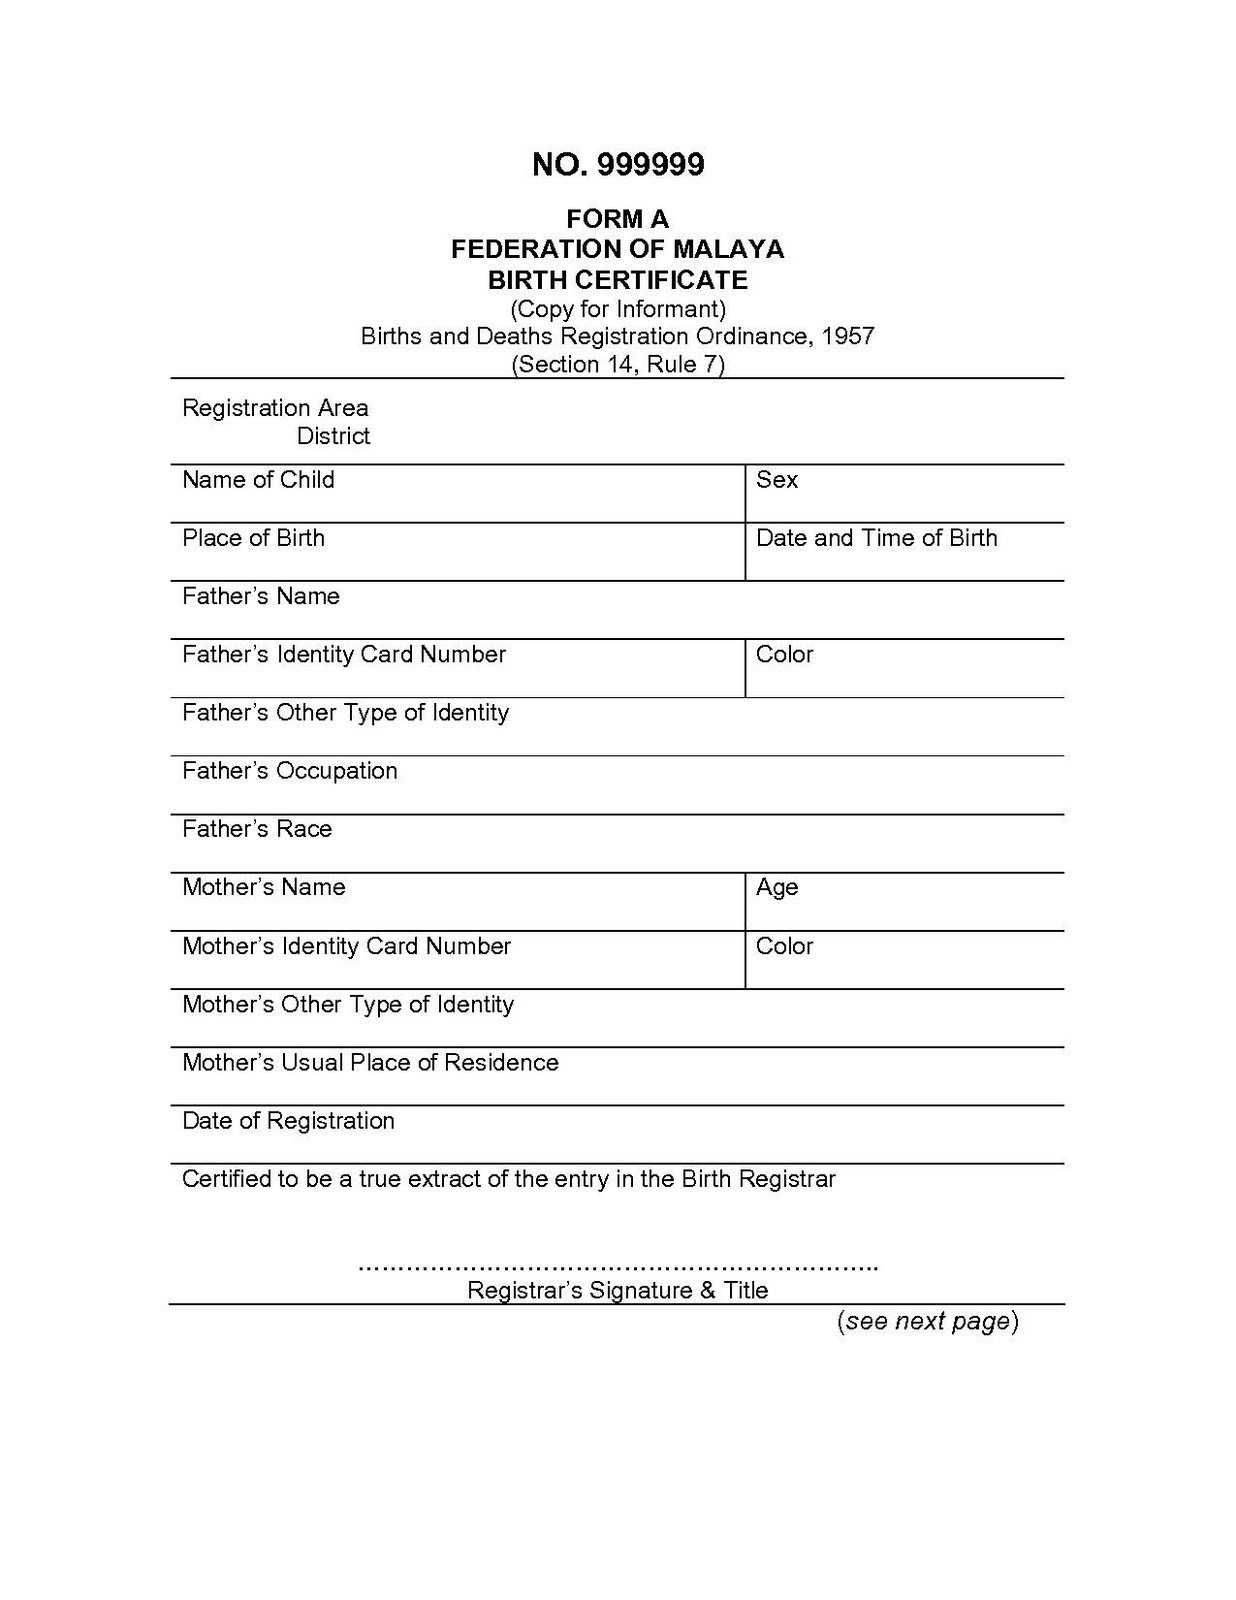 marriage-certificate-template-formats-examples-in-word-excel-free